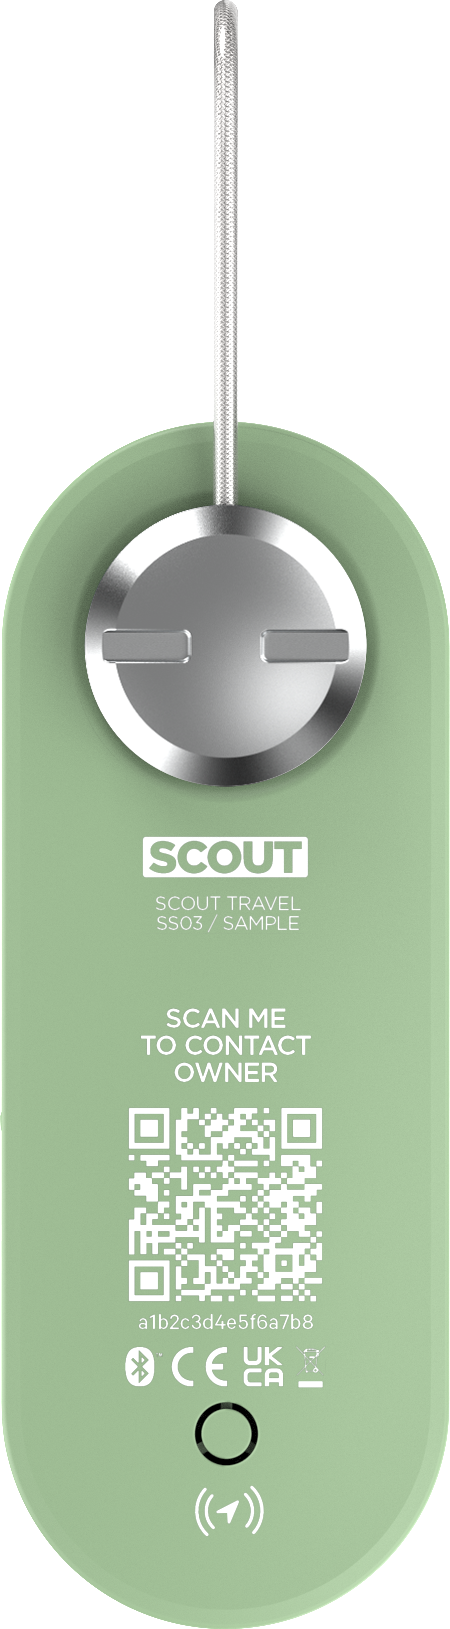 KNOG - Scout Travel Smart Luggage Tag with Tracker - Green-6